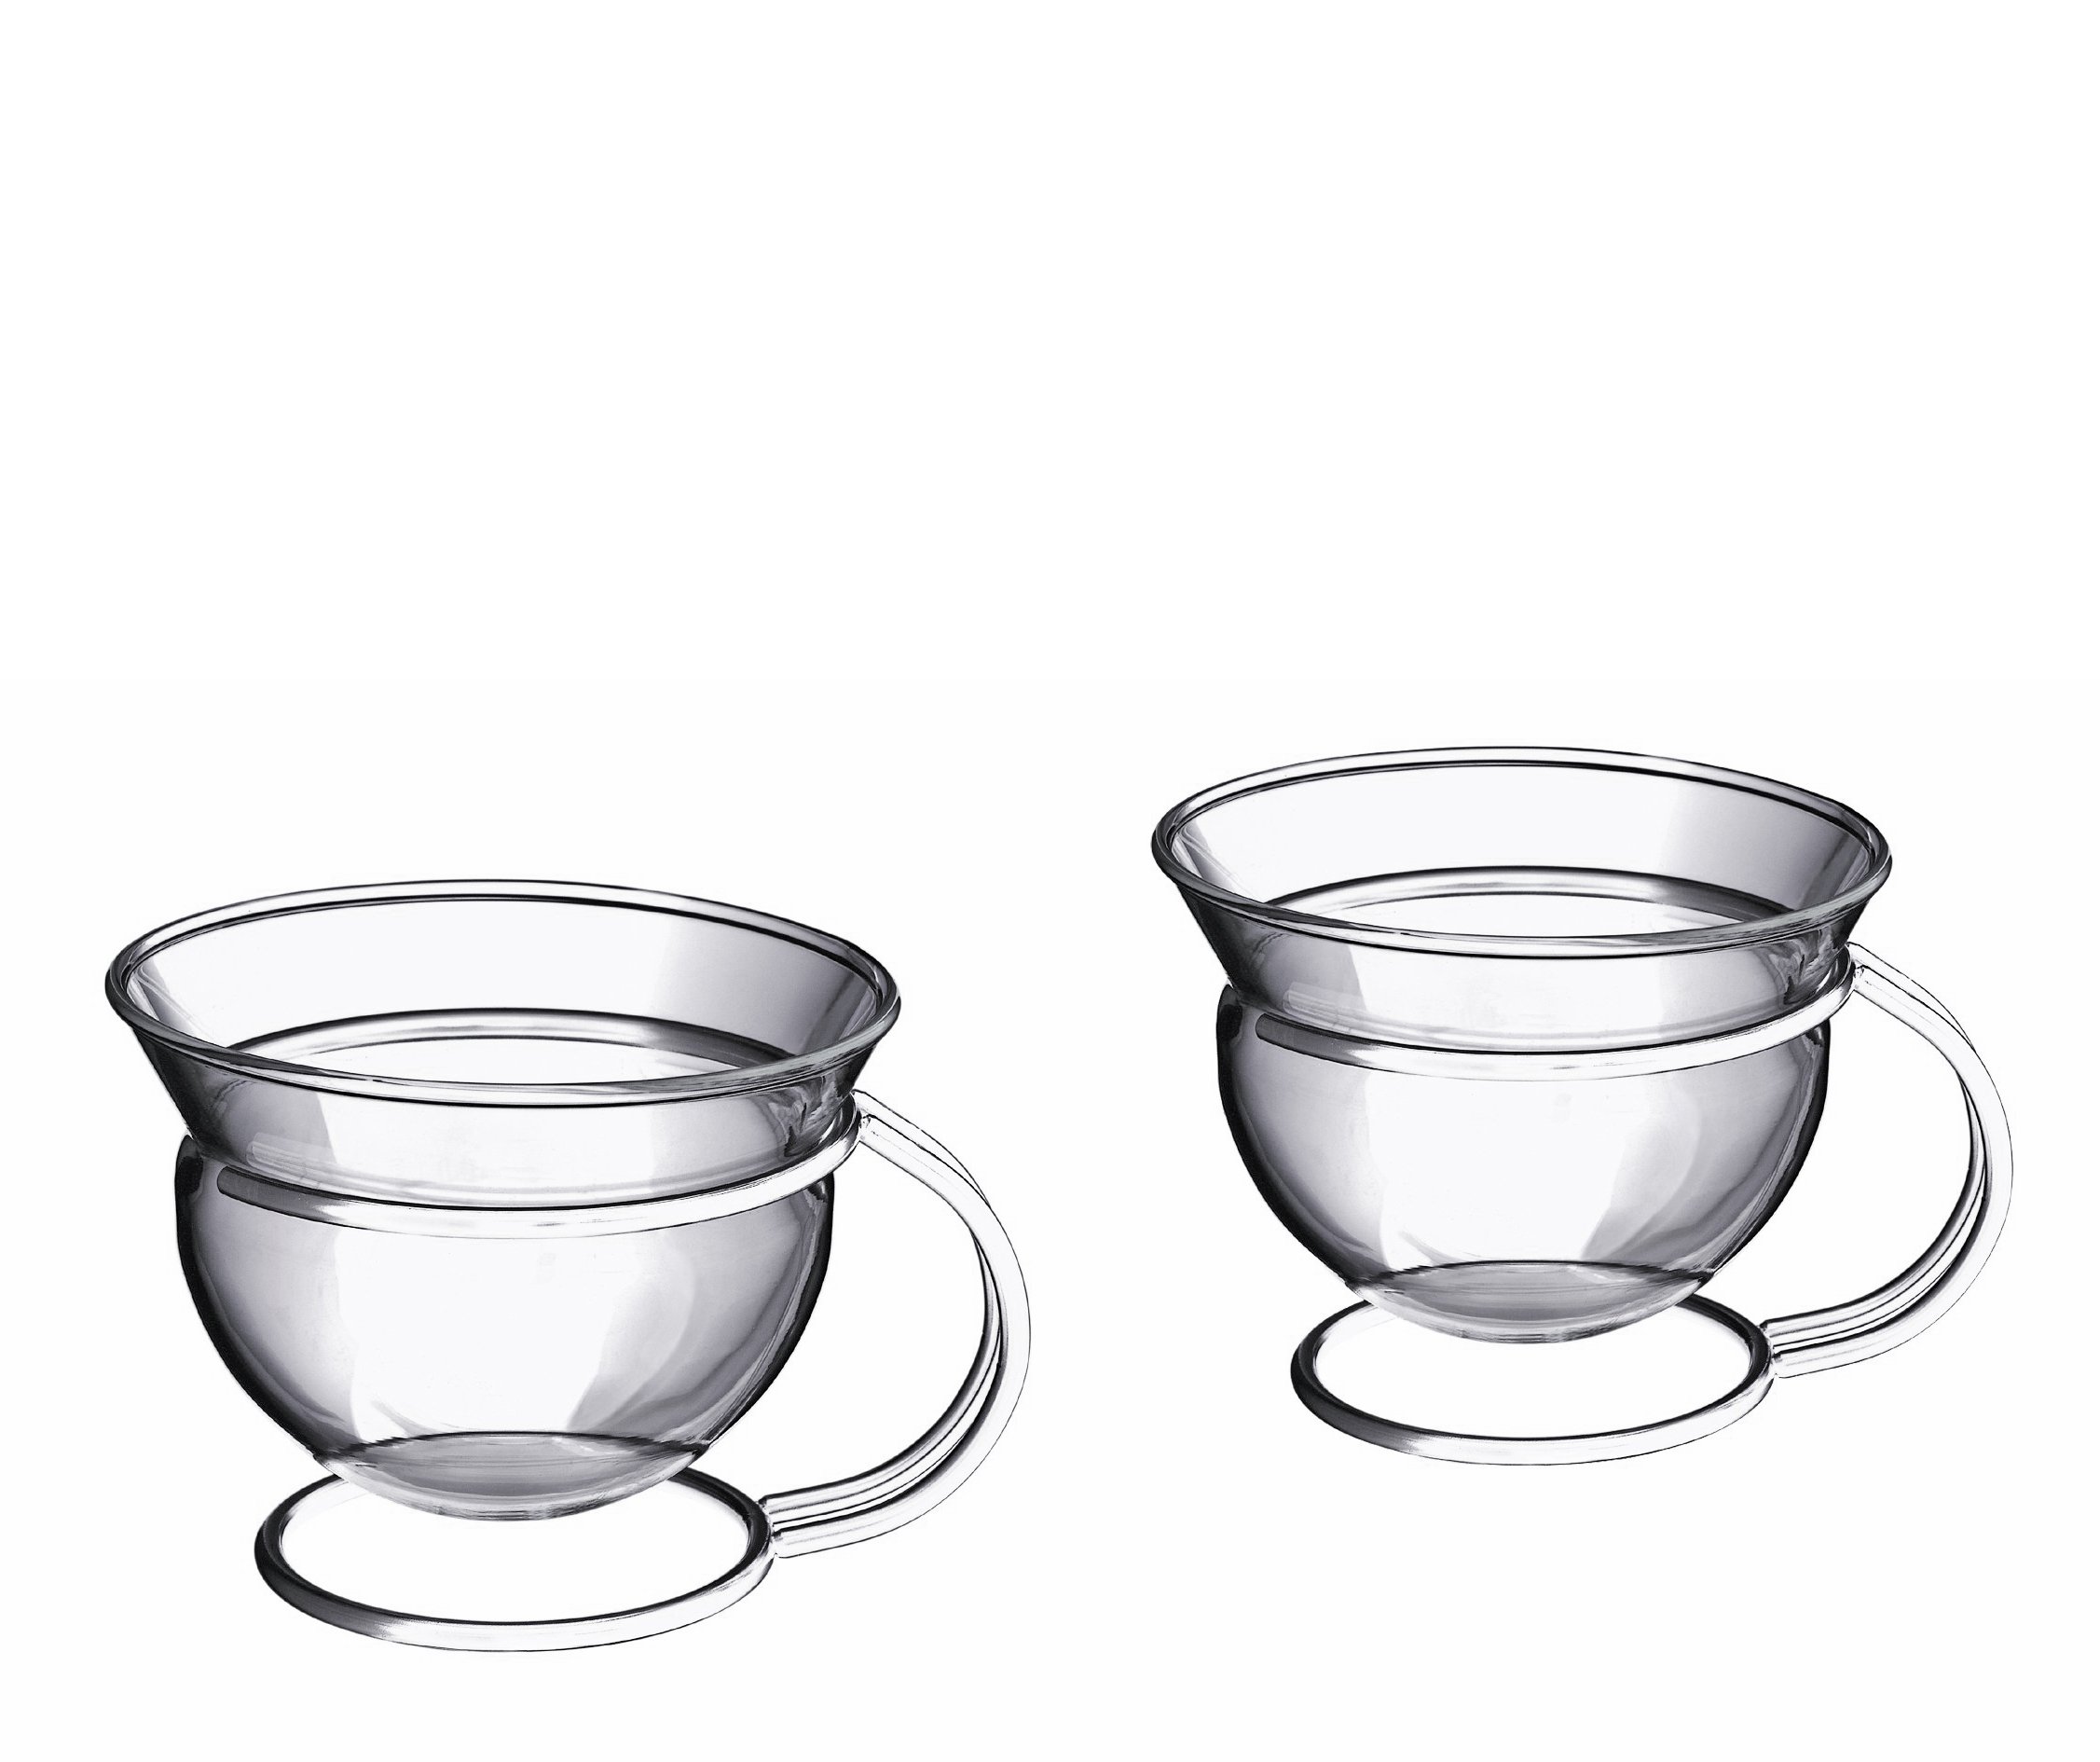 Mono Filio Set of glass teacup without saucer_44325.jpg